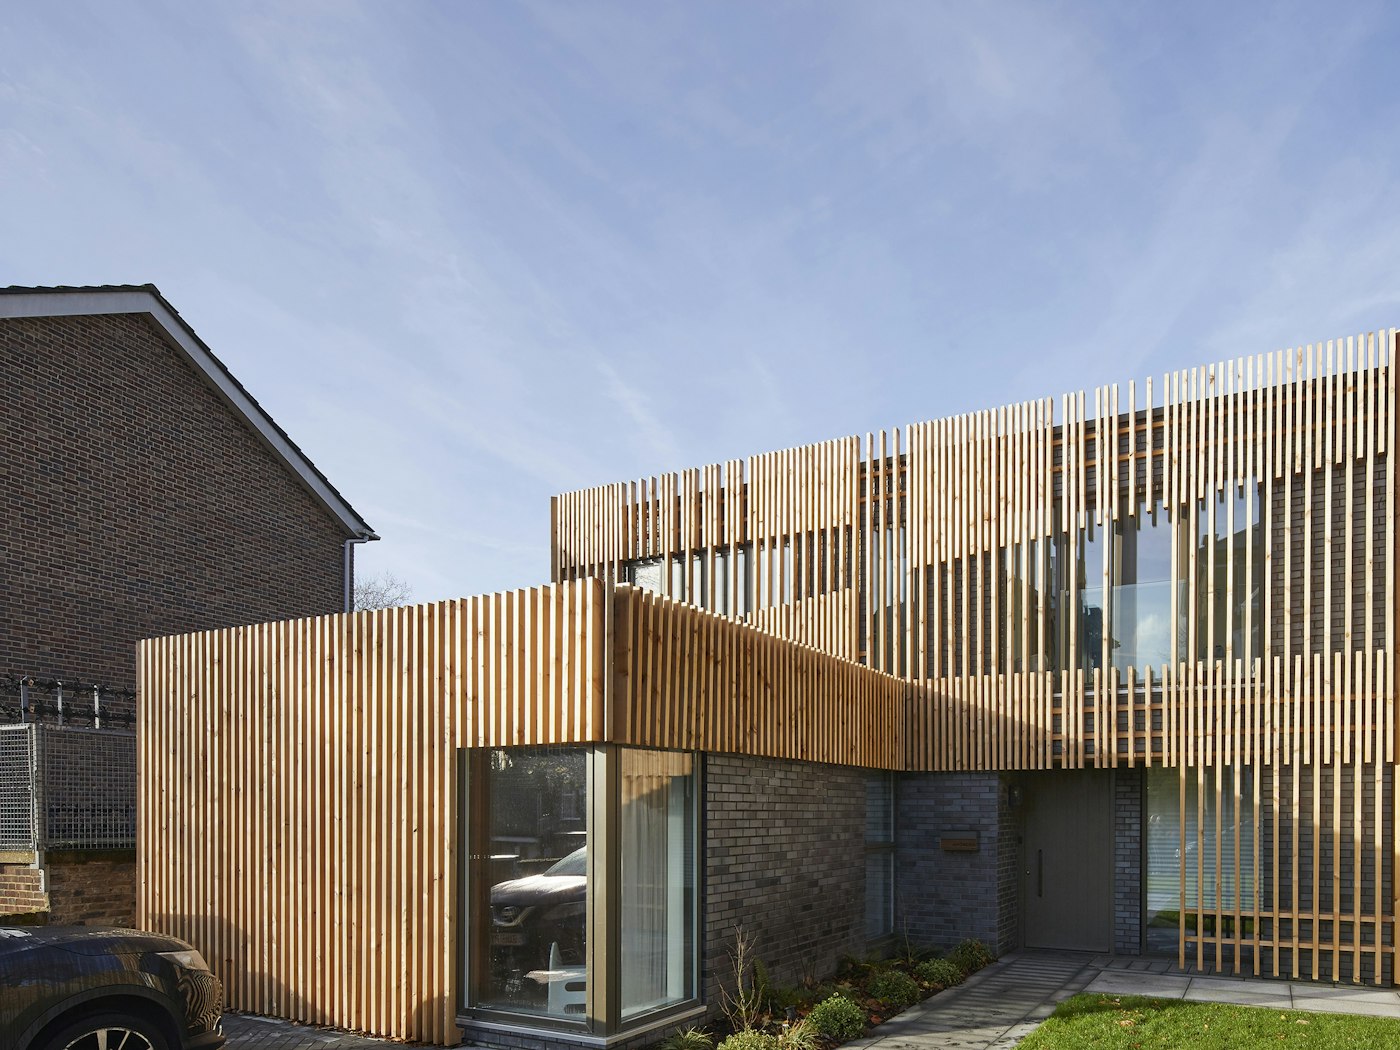 This contemporary build goes a step further with uniquely designed vertical cladding across the entire design